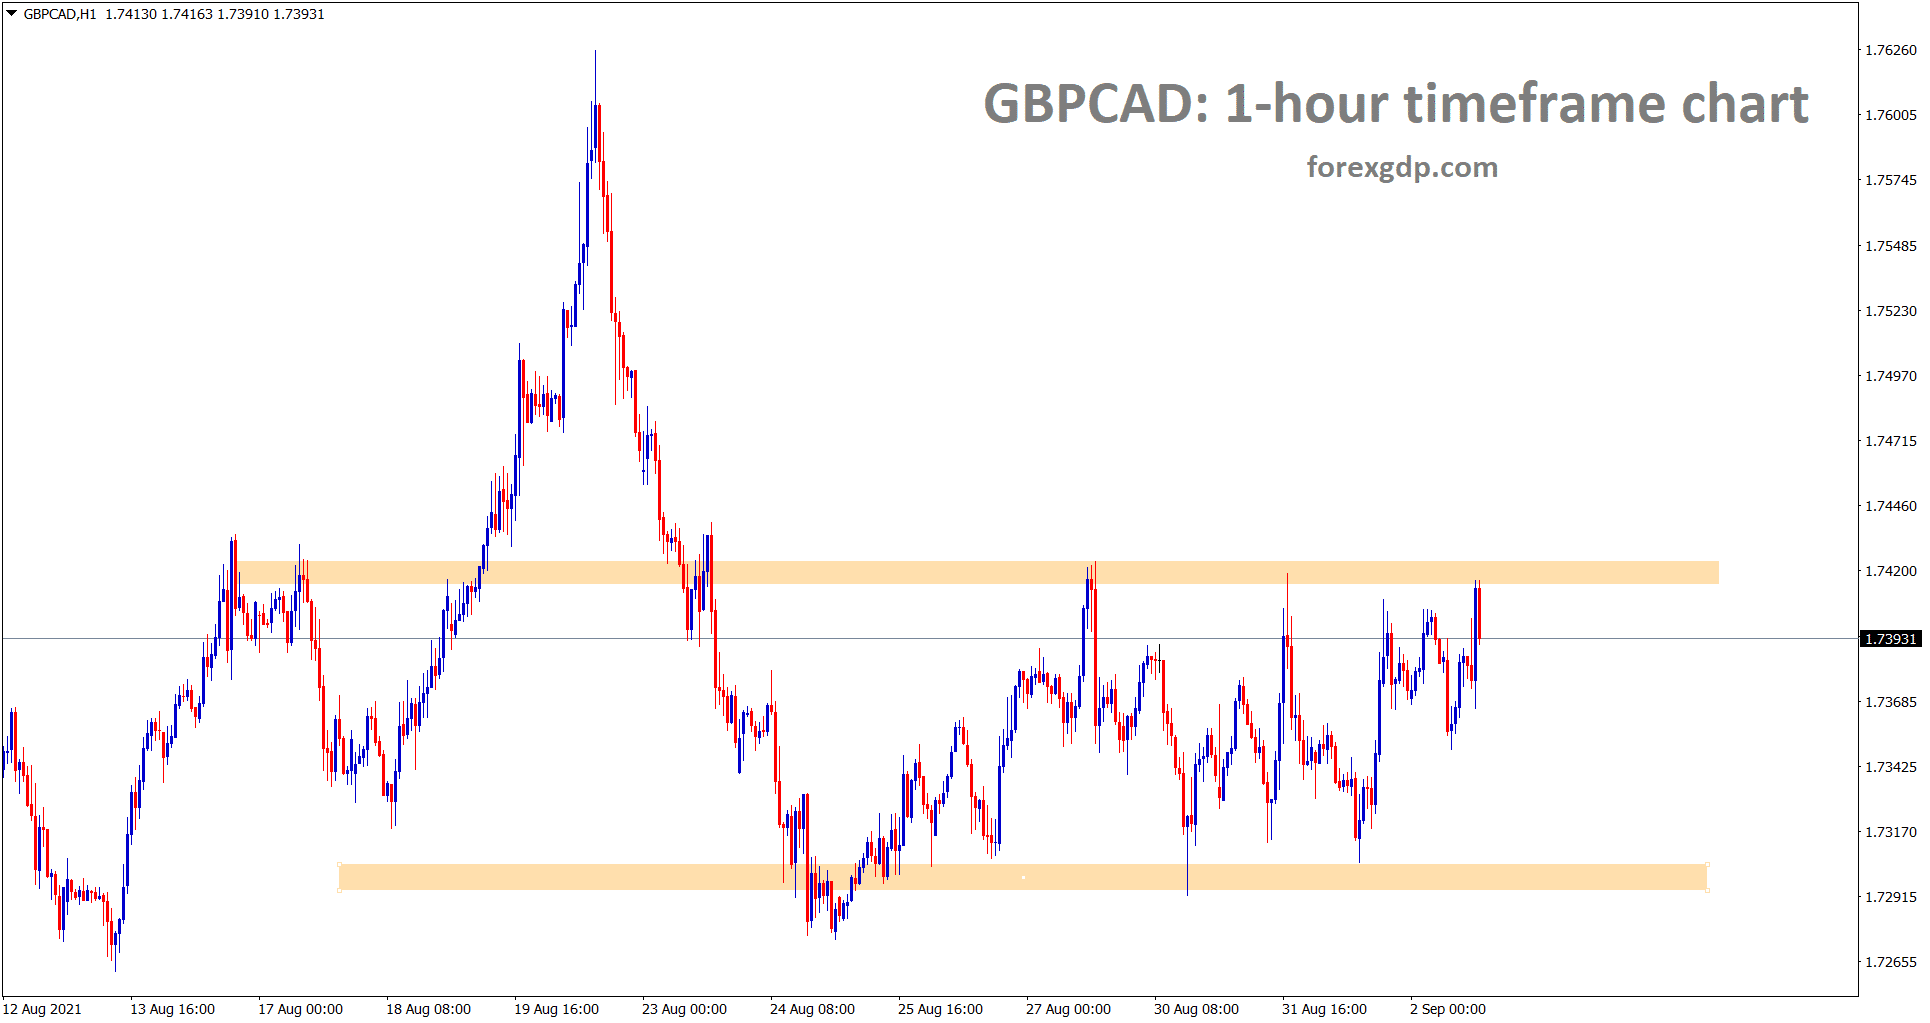 GBPCAD is standing now at the resistance area range